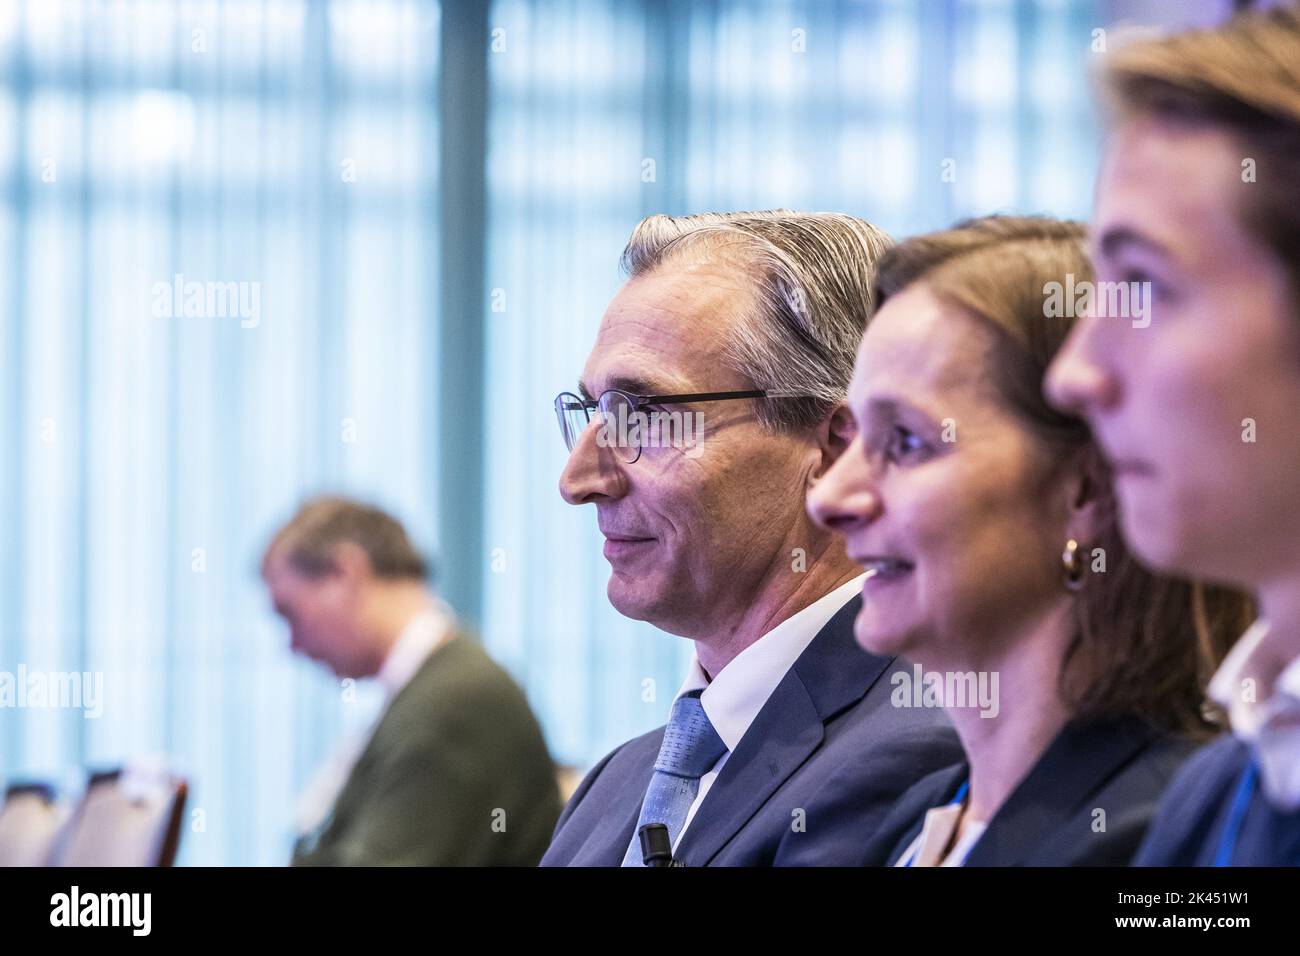 2022-09-30 09:24:24 AMSTERDAM - CEO Roy Jakobs of Koninklijke Philips NV before the start of an extraordinary shareholders' meeting of Philips. ANP EVA PLEVIER AMSTERDAM netherlands out - belgium out Stock Photo